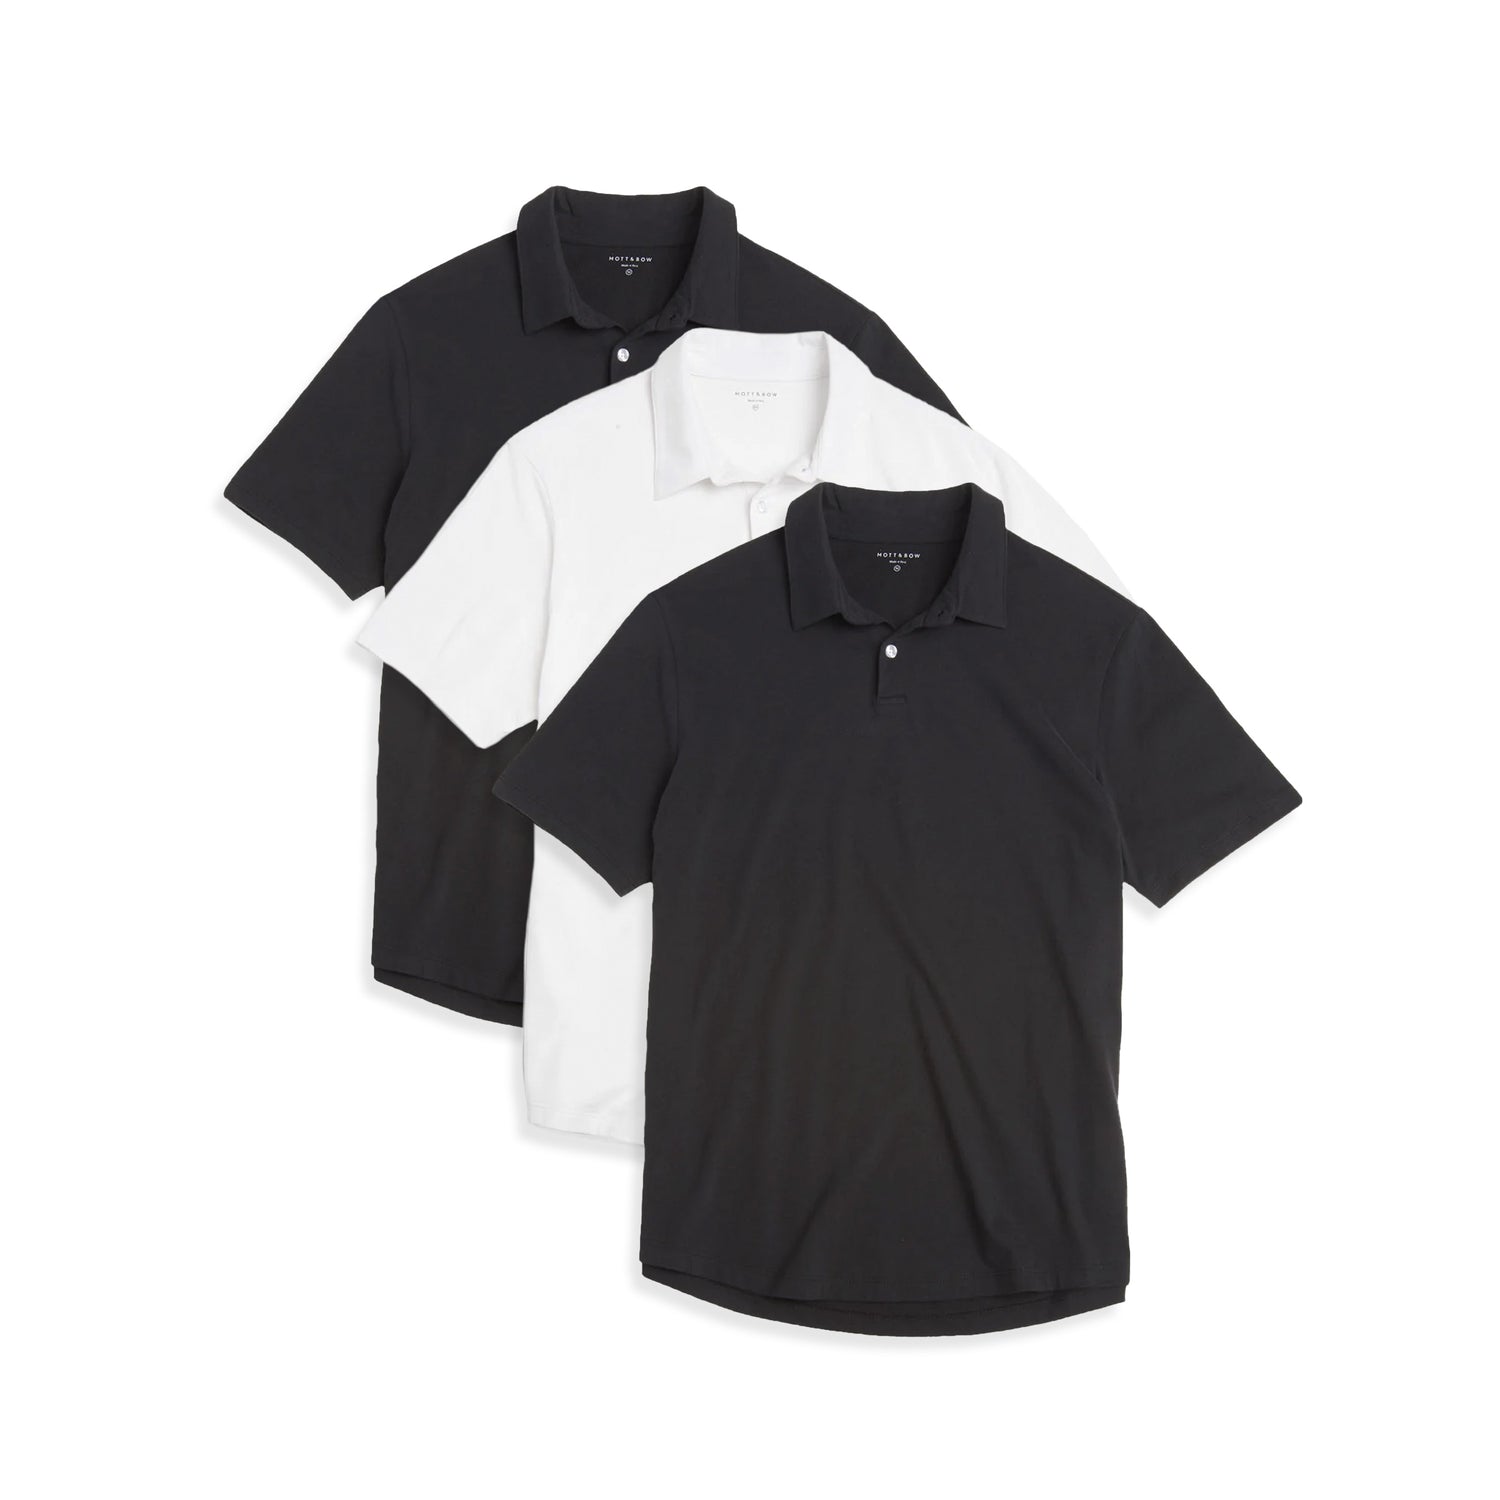 mens jersey polo 3 packs